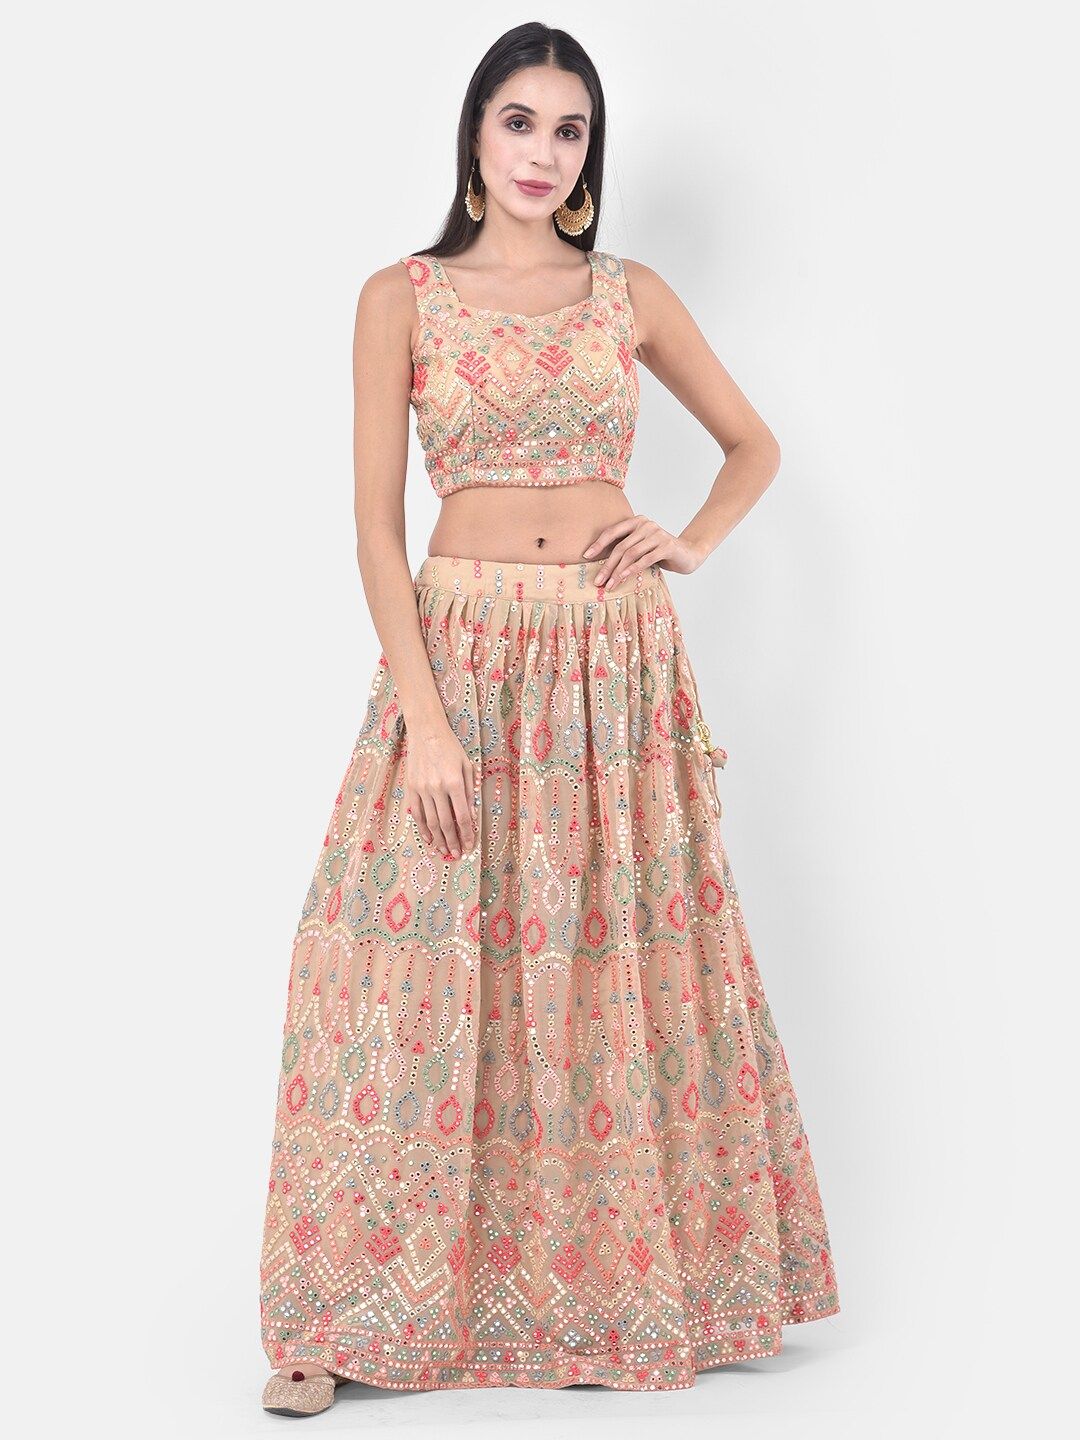 Neerus Beige & Silver-Coloured Embellished Ready to Wear Lehenga & Blouse with Dupatta Price in India